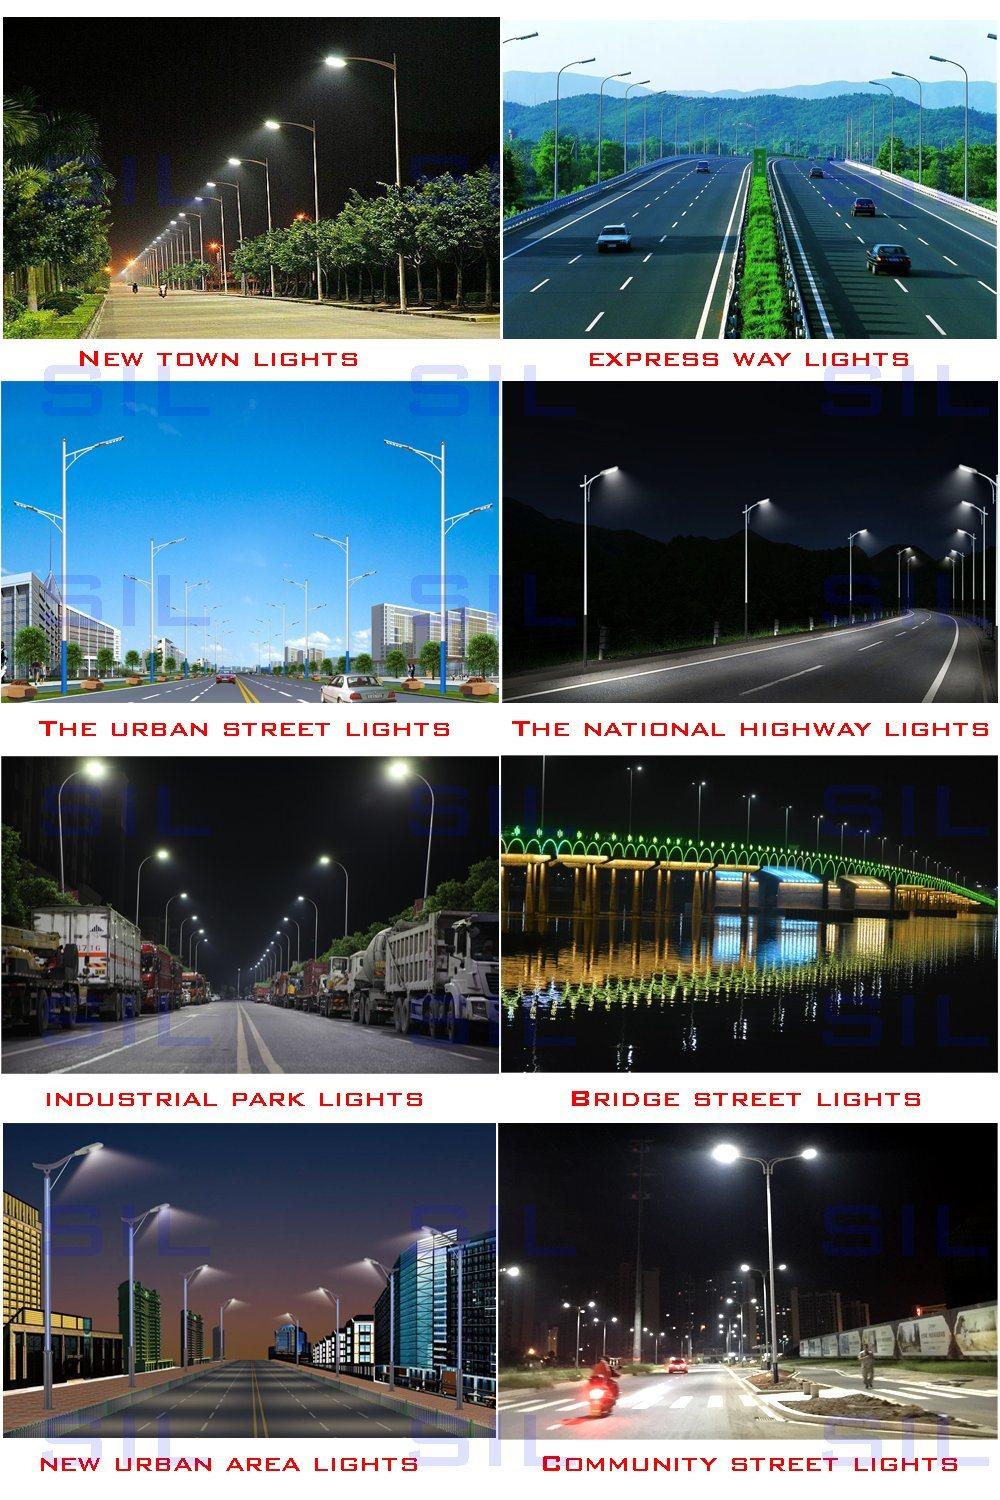 Hot Sales All in One Solar Street Light LED Solar Street Lamp 50watt Solar LED Street Light with Remote Control